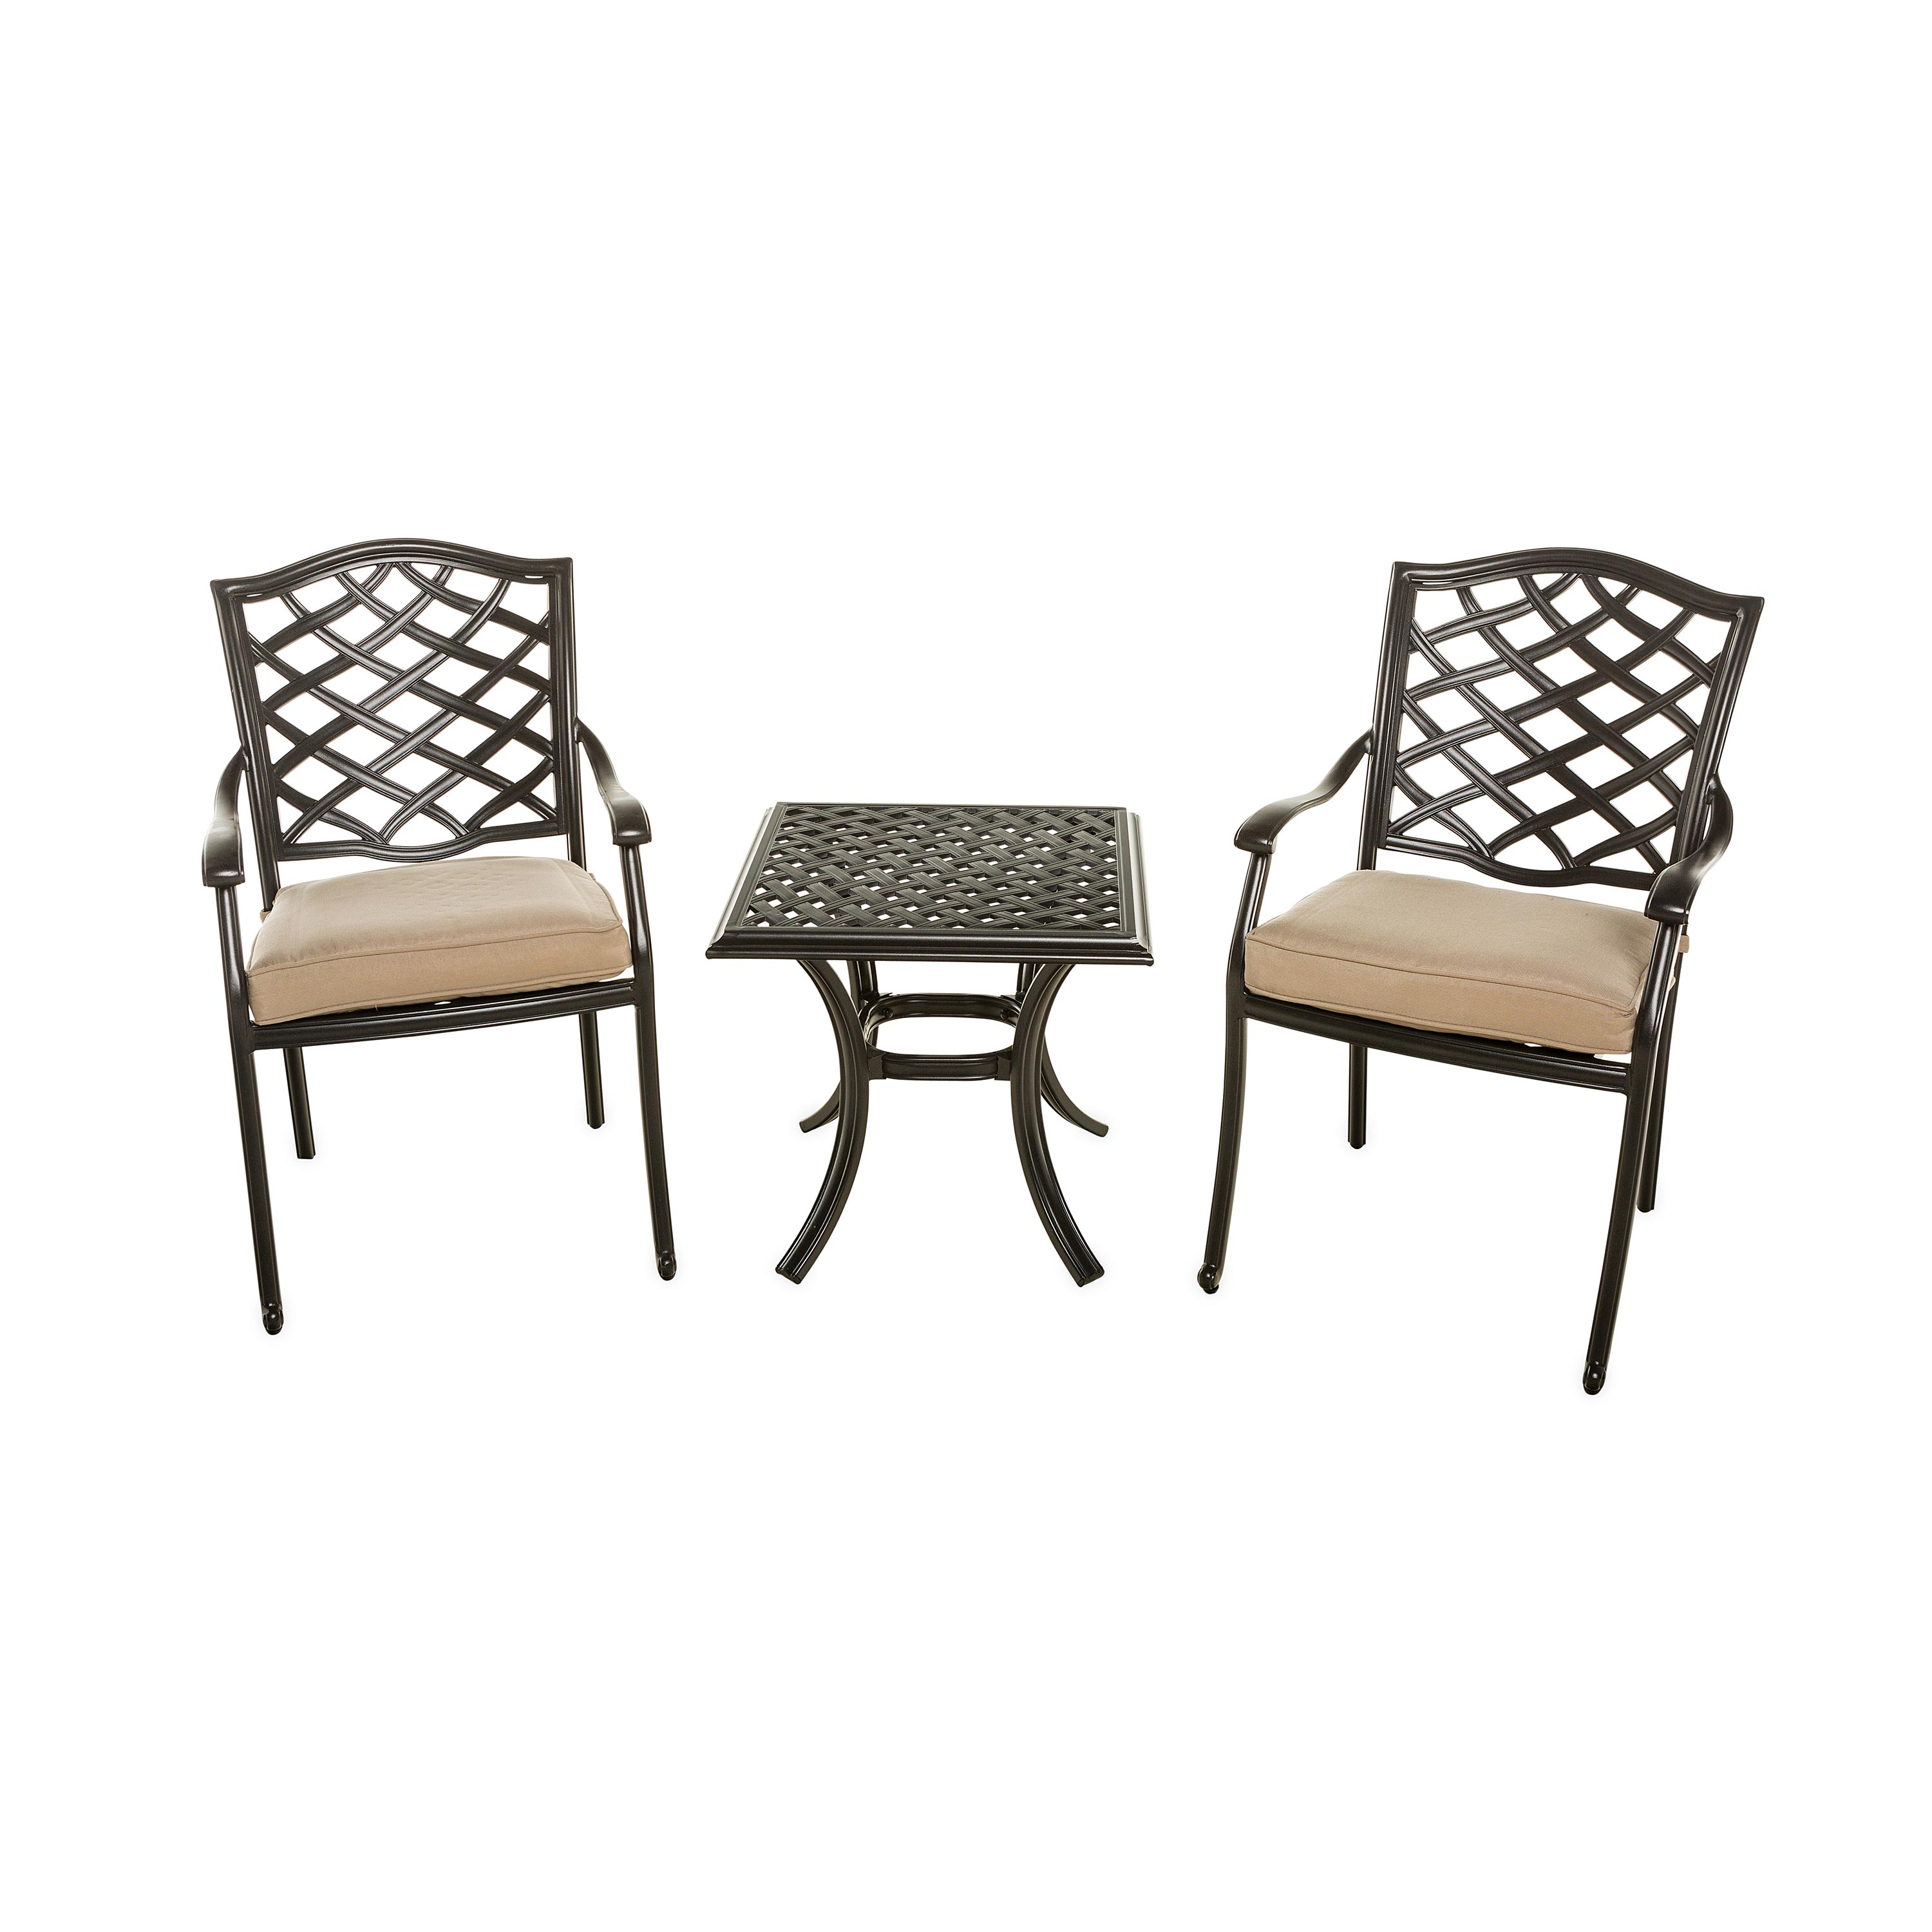 Park Grove Cast Aluminum Outdoor 3-Piece Seating Set with Cushions